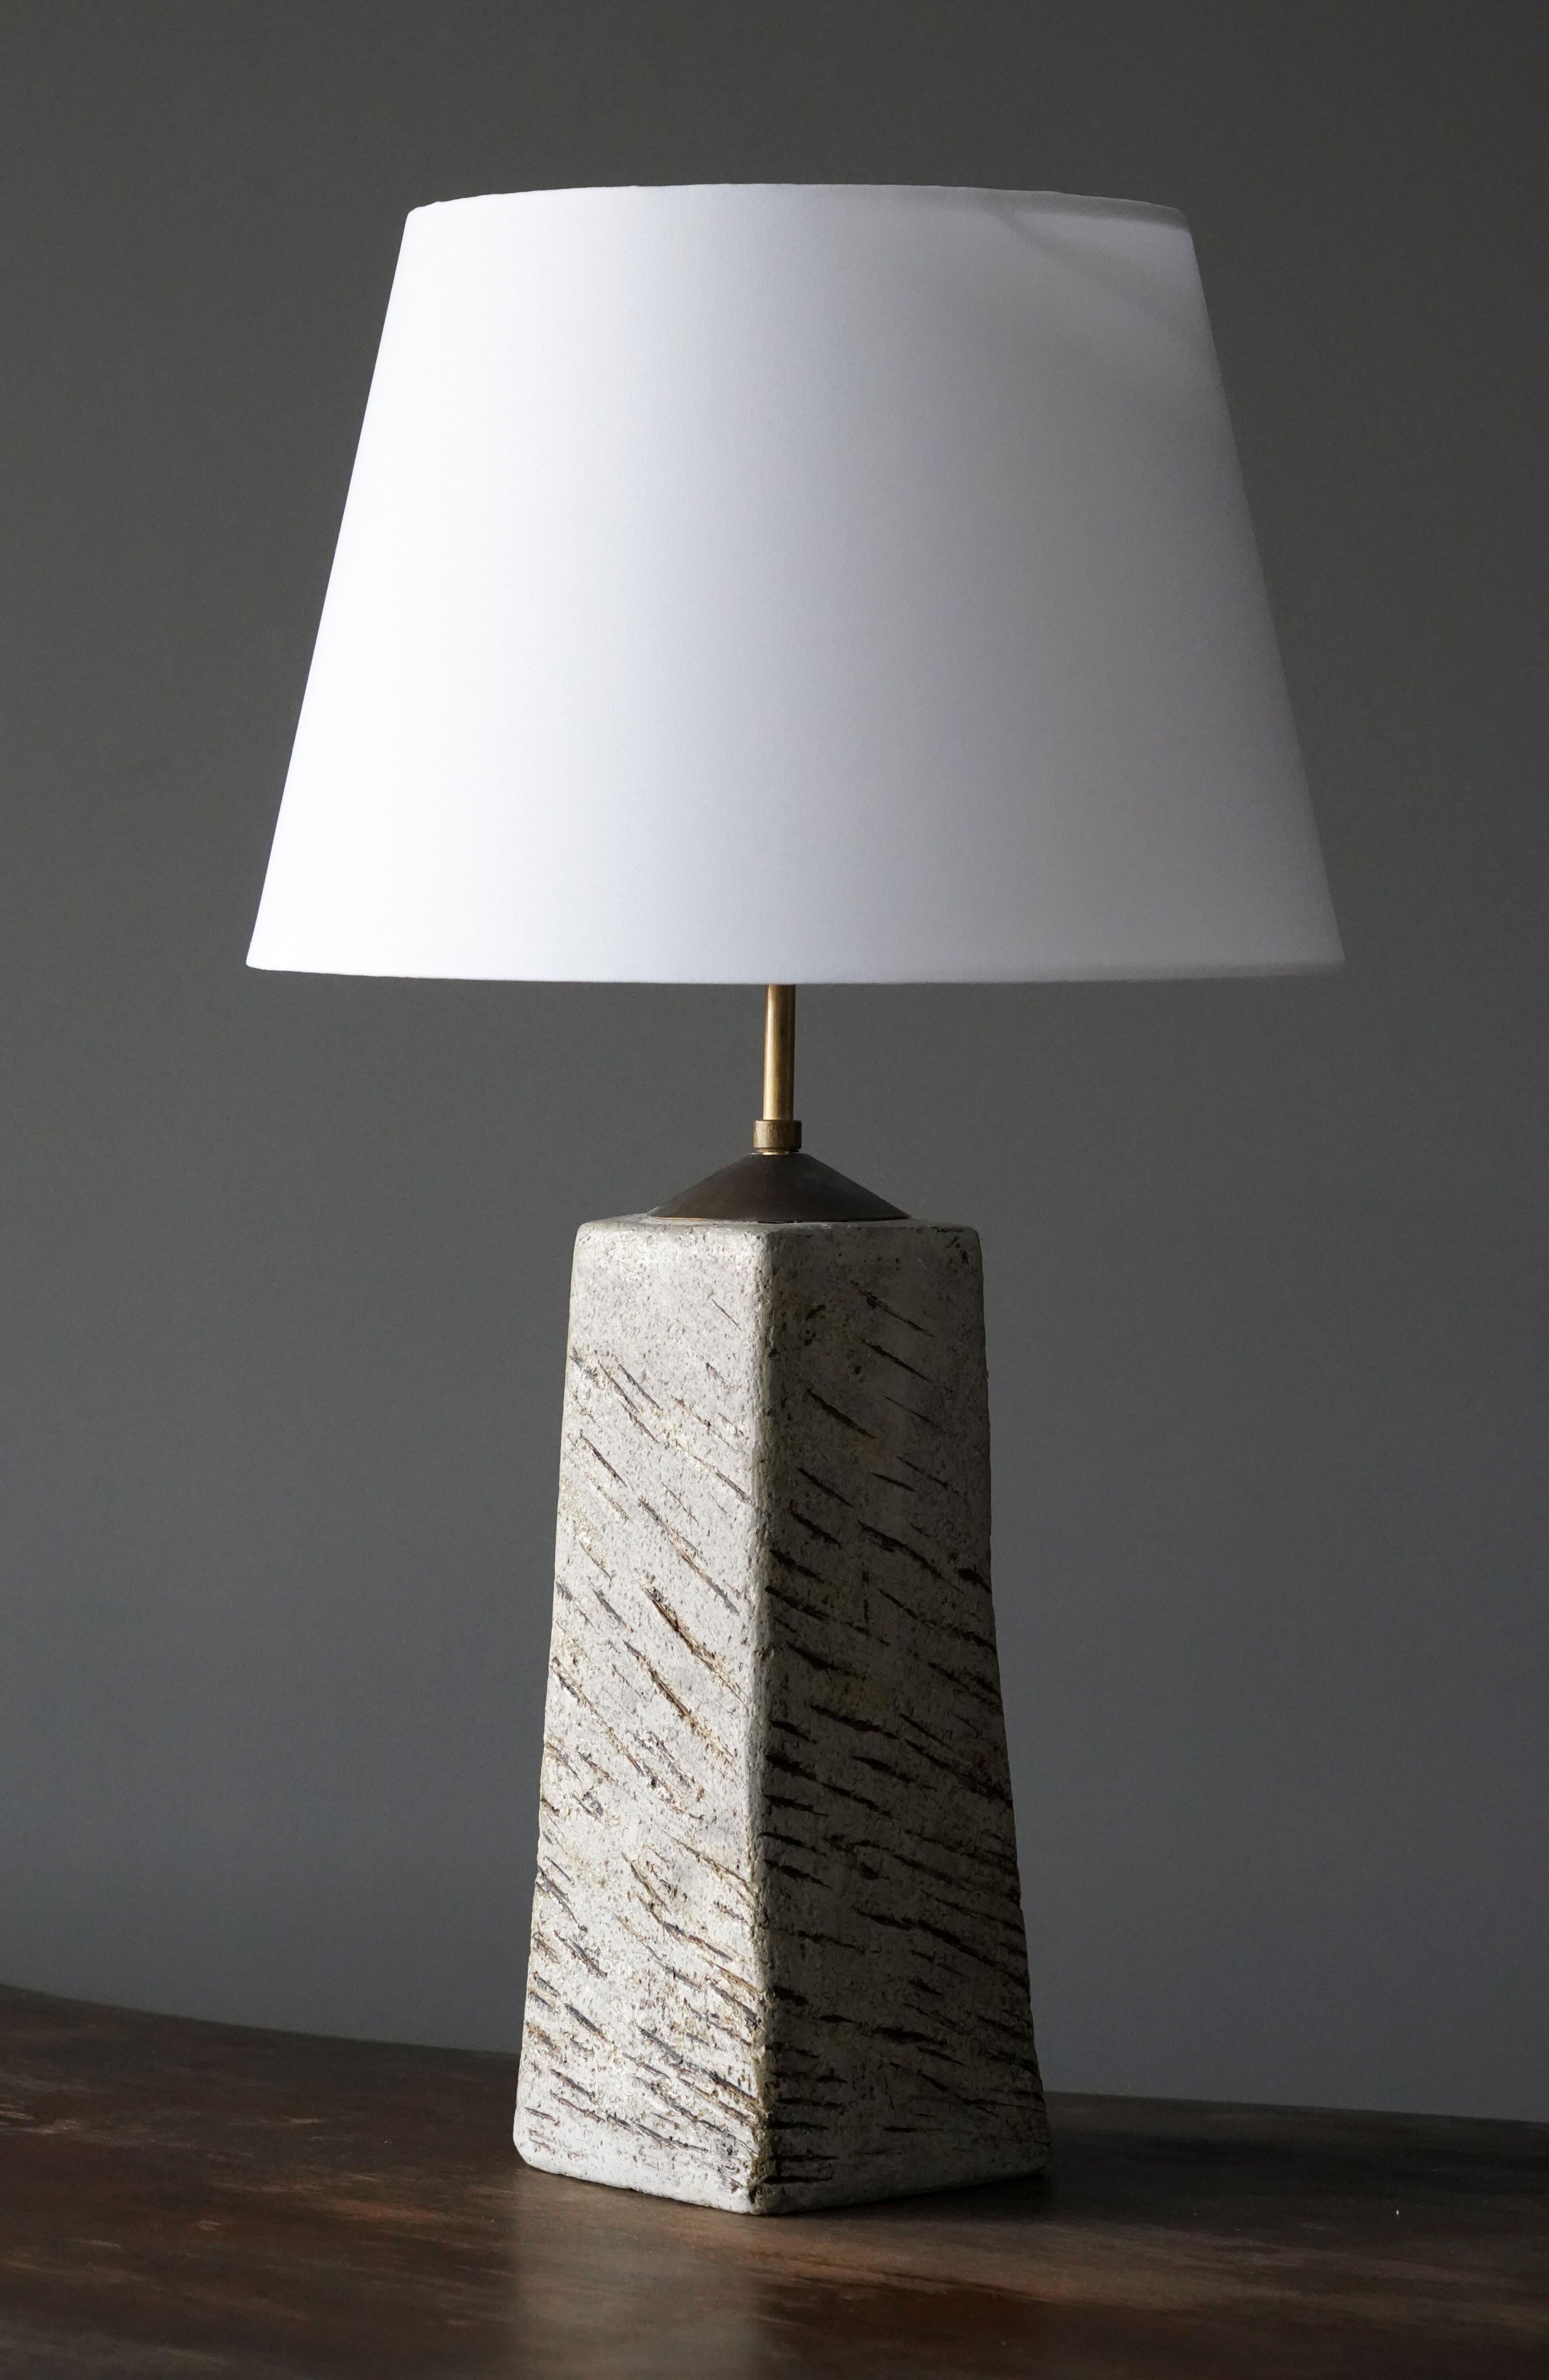 A table lamp, likely unique, by Finnish ceramic artist Toini Muona (1904 - 1987). 

Sold without lampshade. Stated dimensions excluding lampshade.